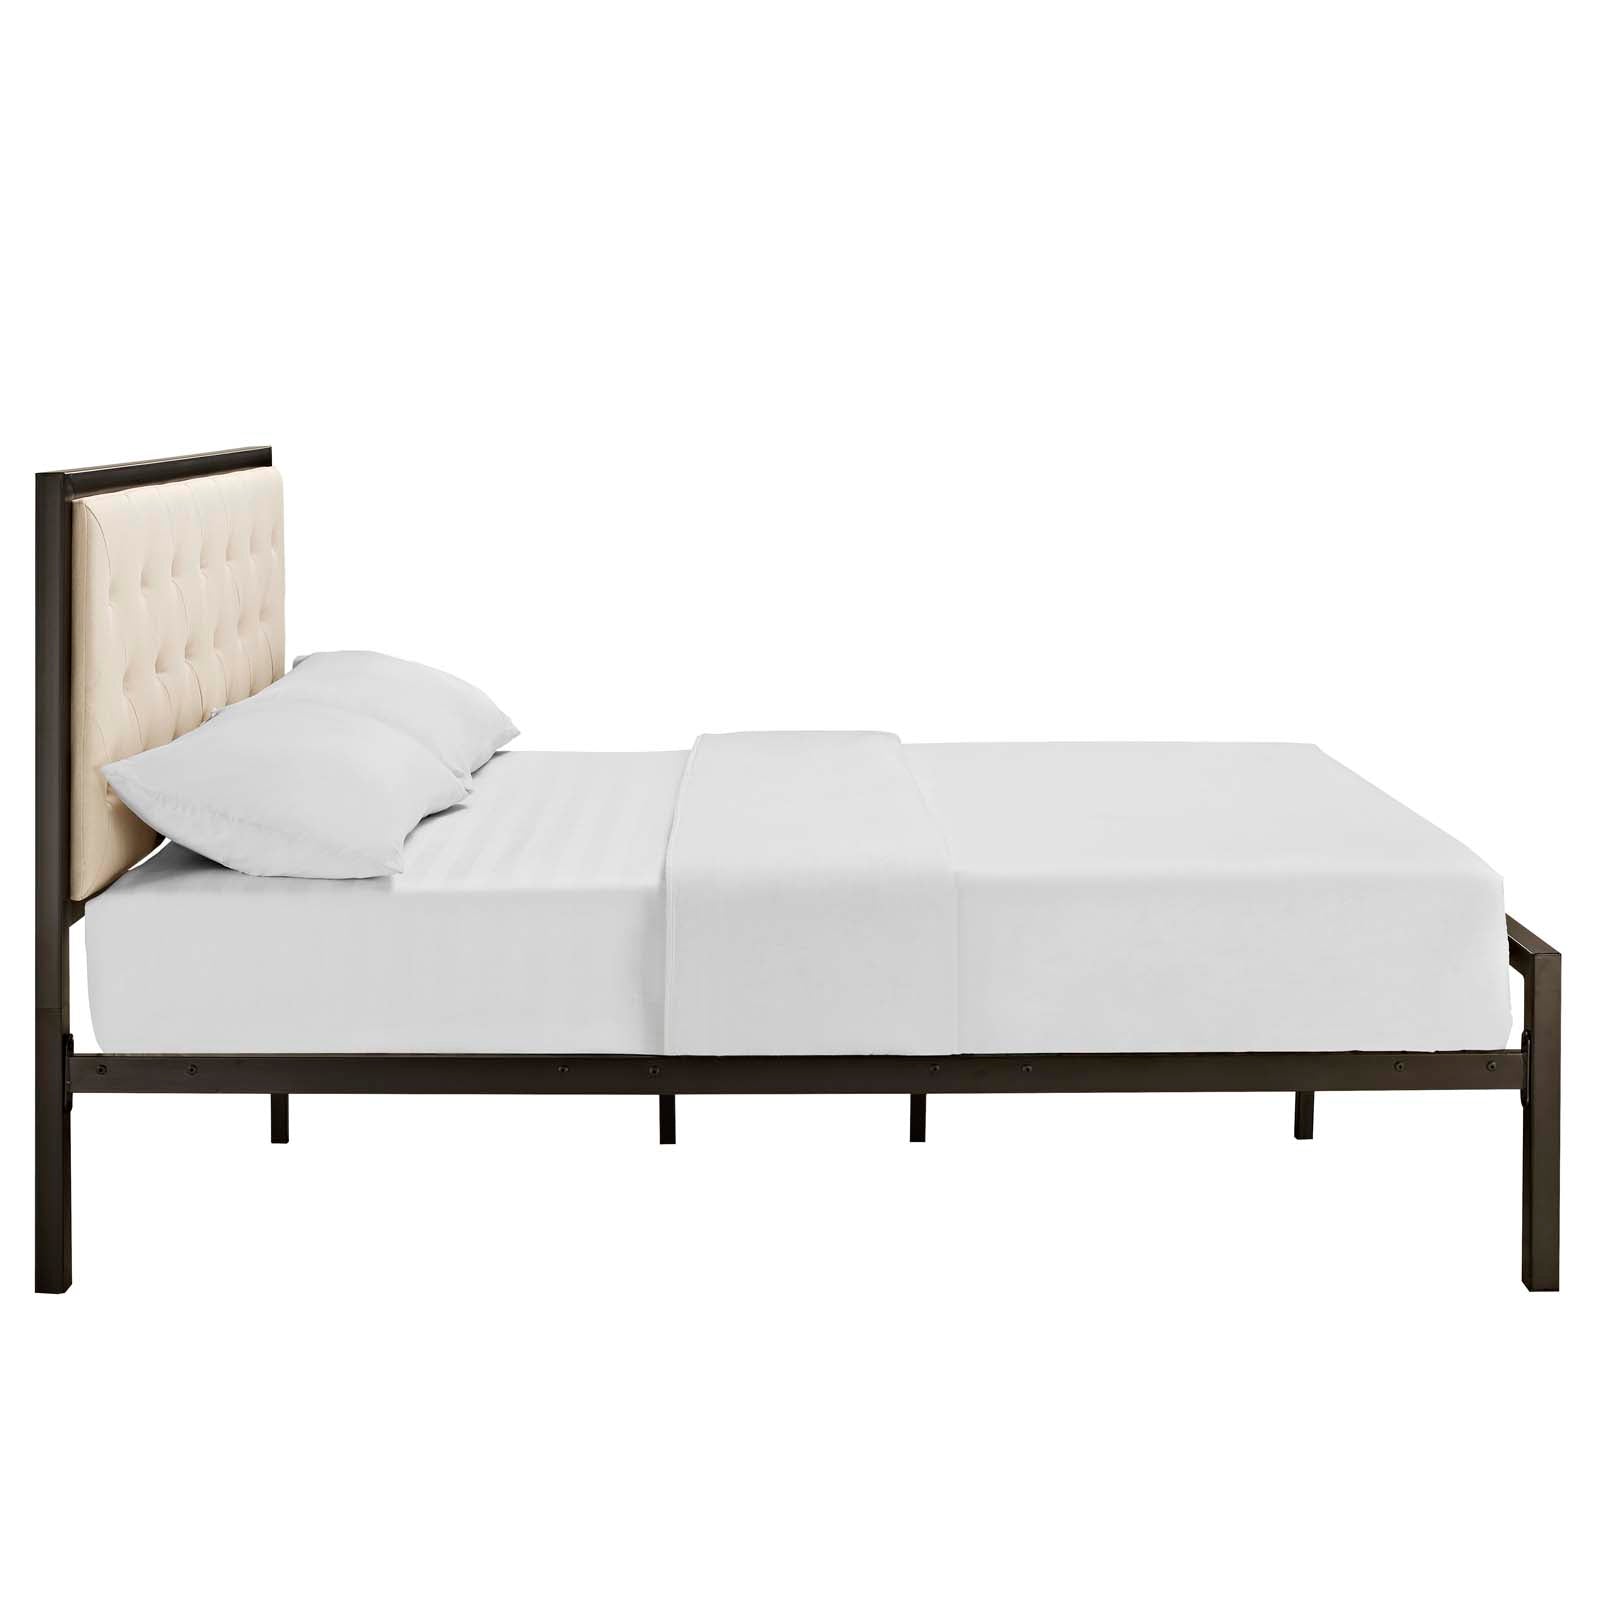 Modway Beds - Mia Full Fabric Bed Brown Beige